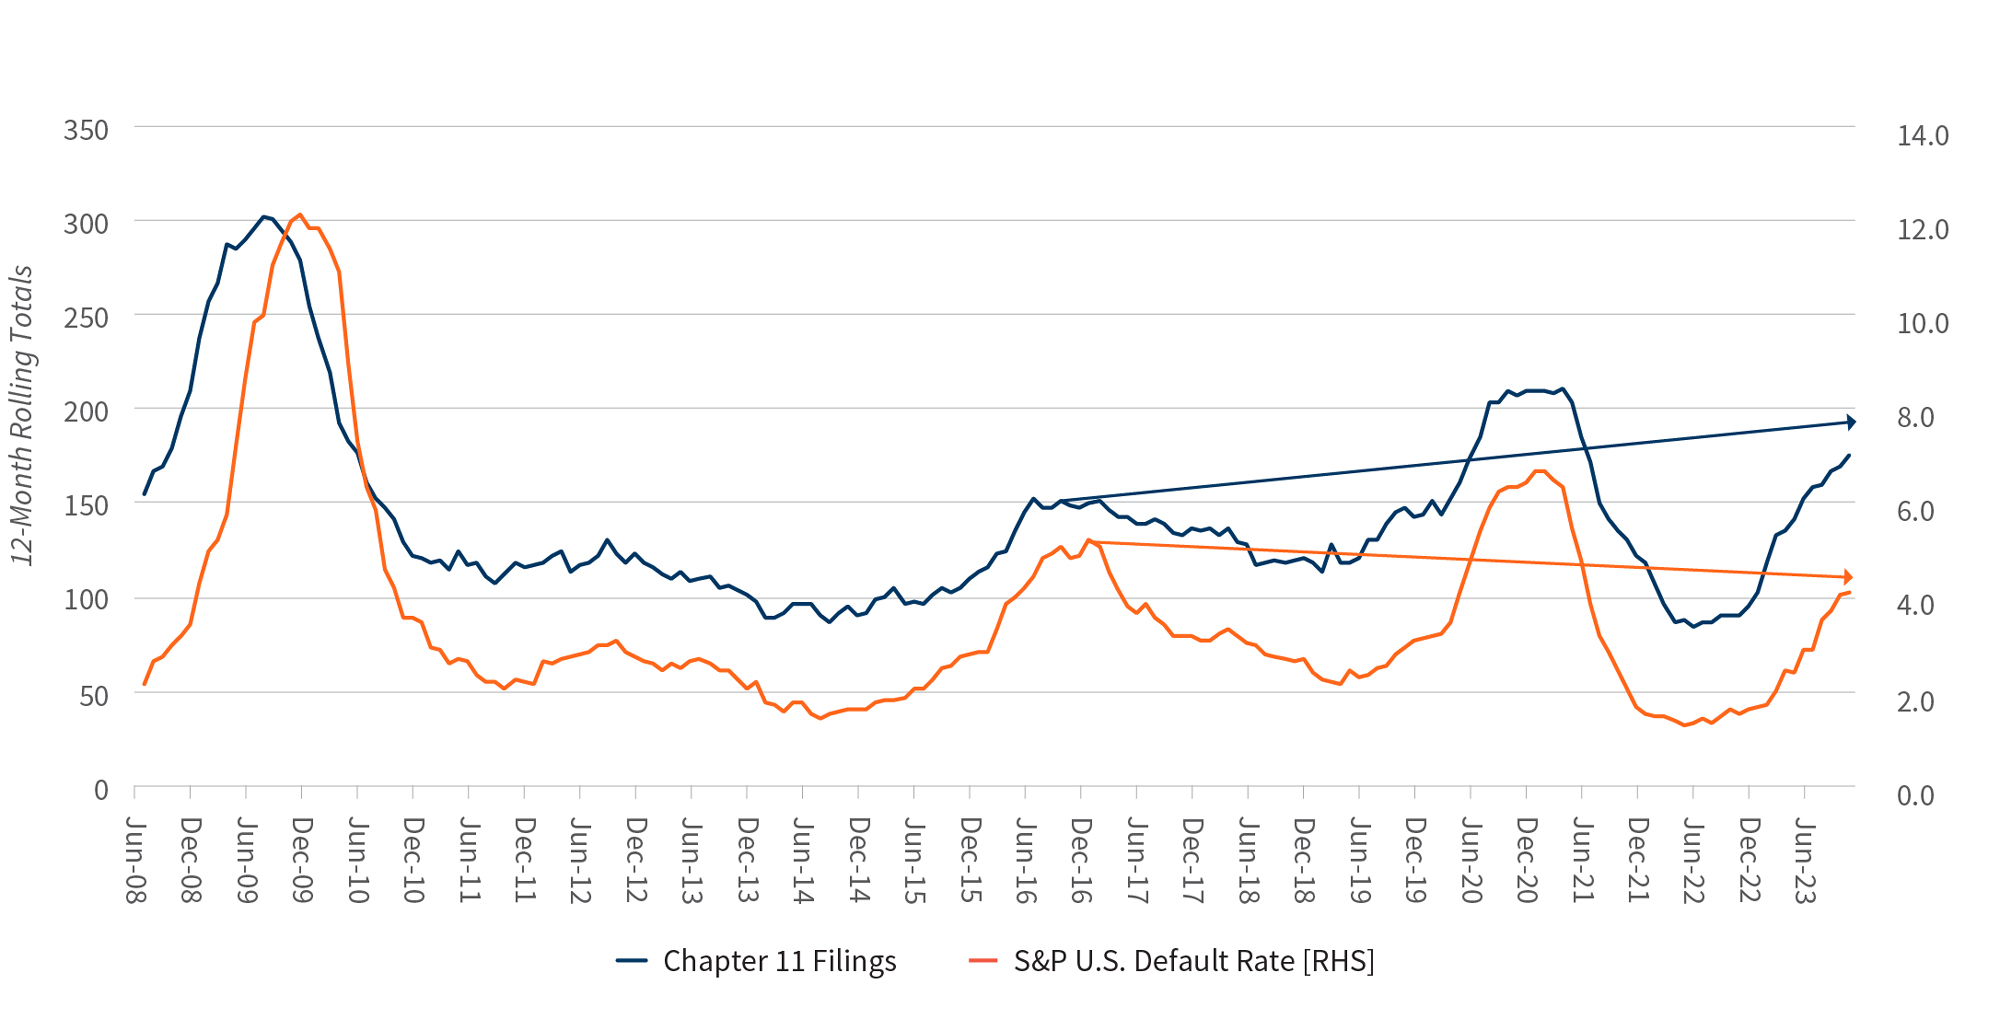 Figure 2 - Large Chapter 11 Fillings vs. S&P Default Rate - 12-Month Rolling Totals